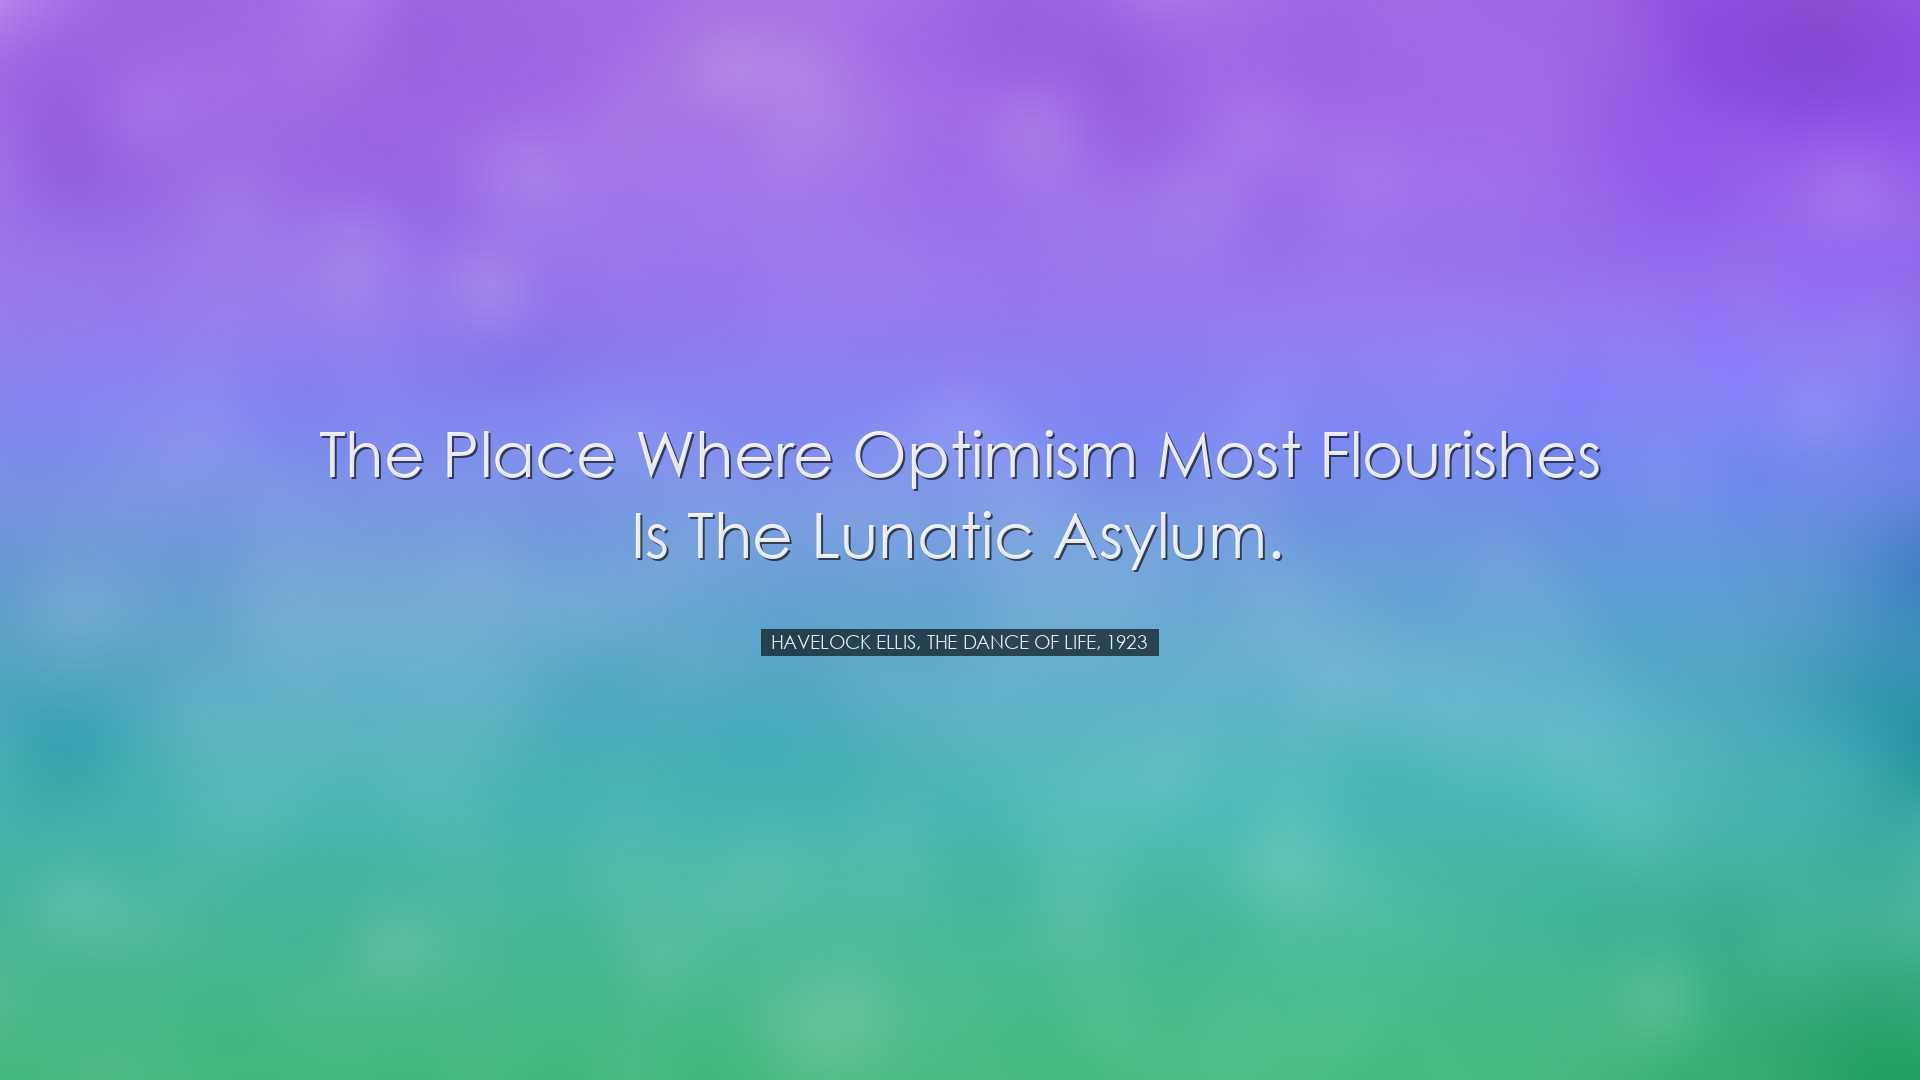 The place where optimism most flourishes is the lunatic asylum. -